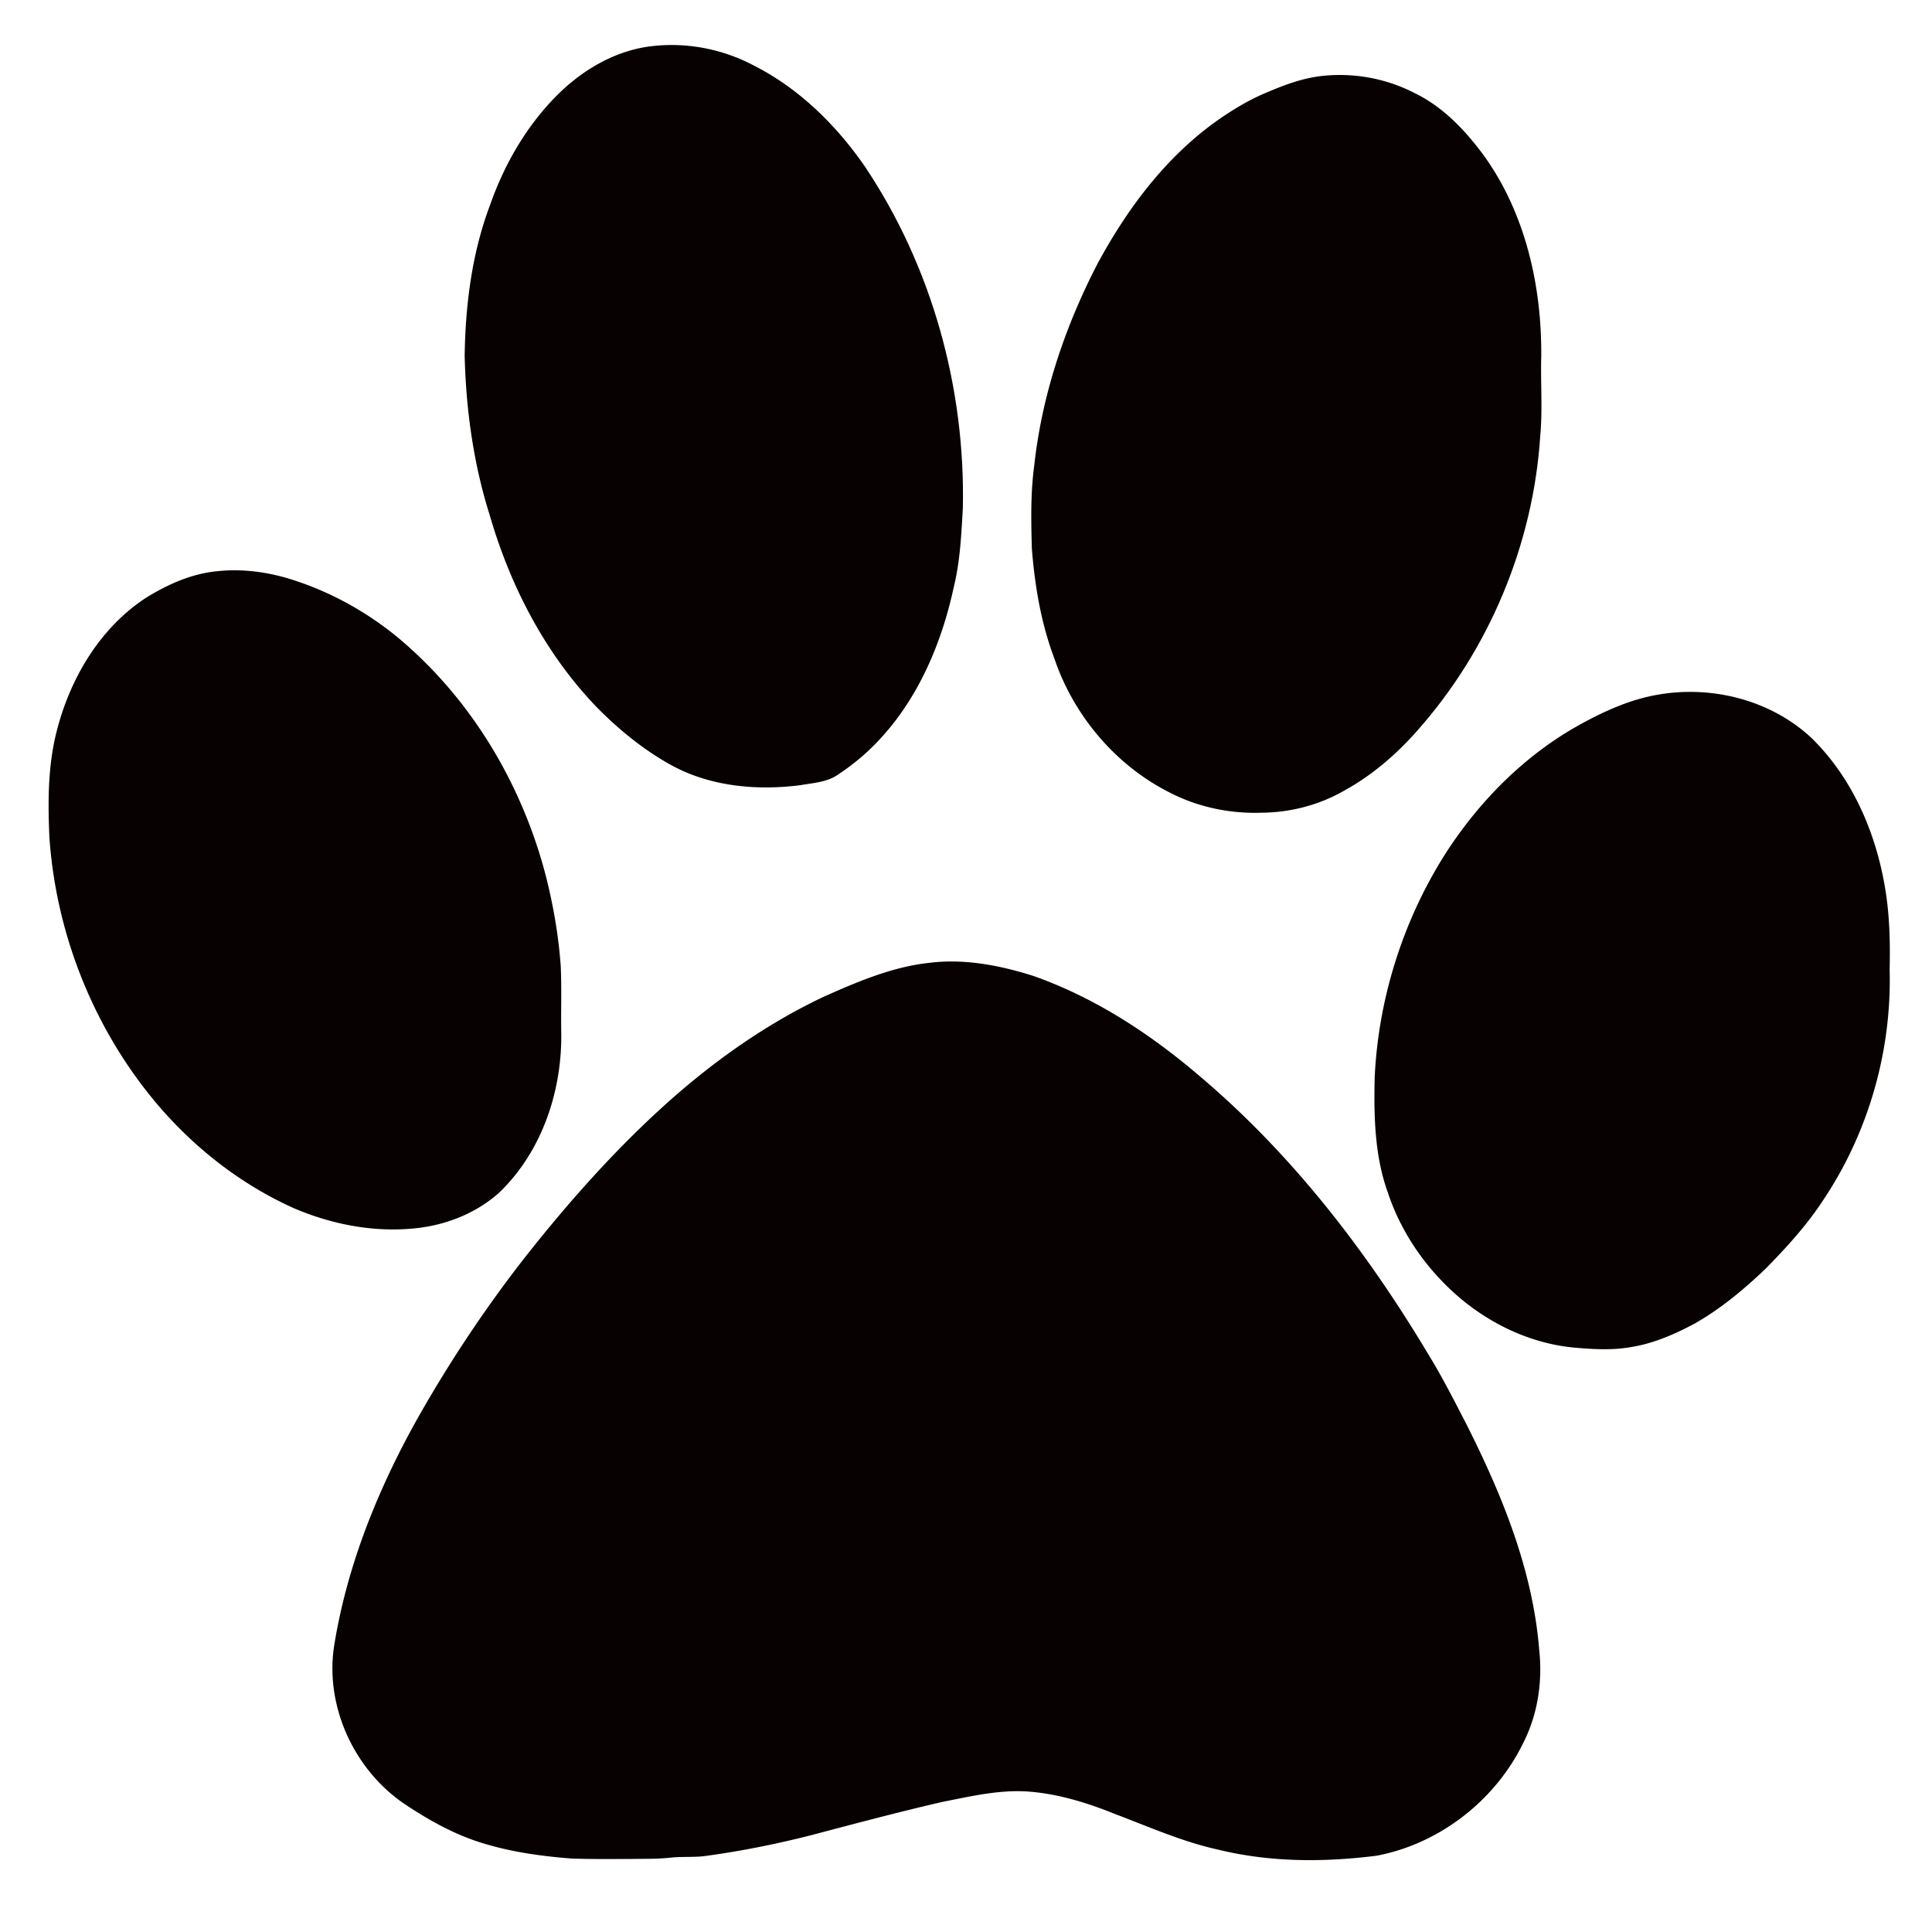 Doghouse clipart dog themed. Panther paw print clip